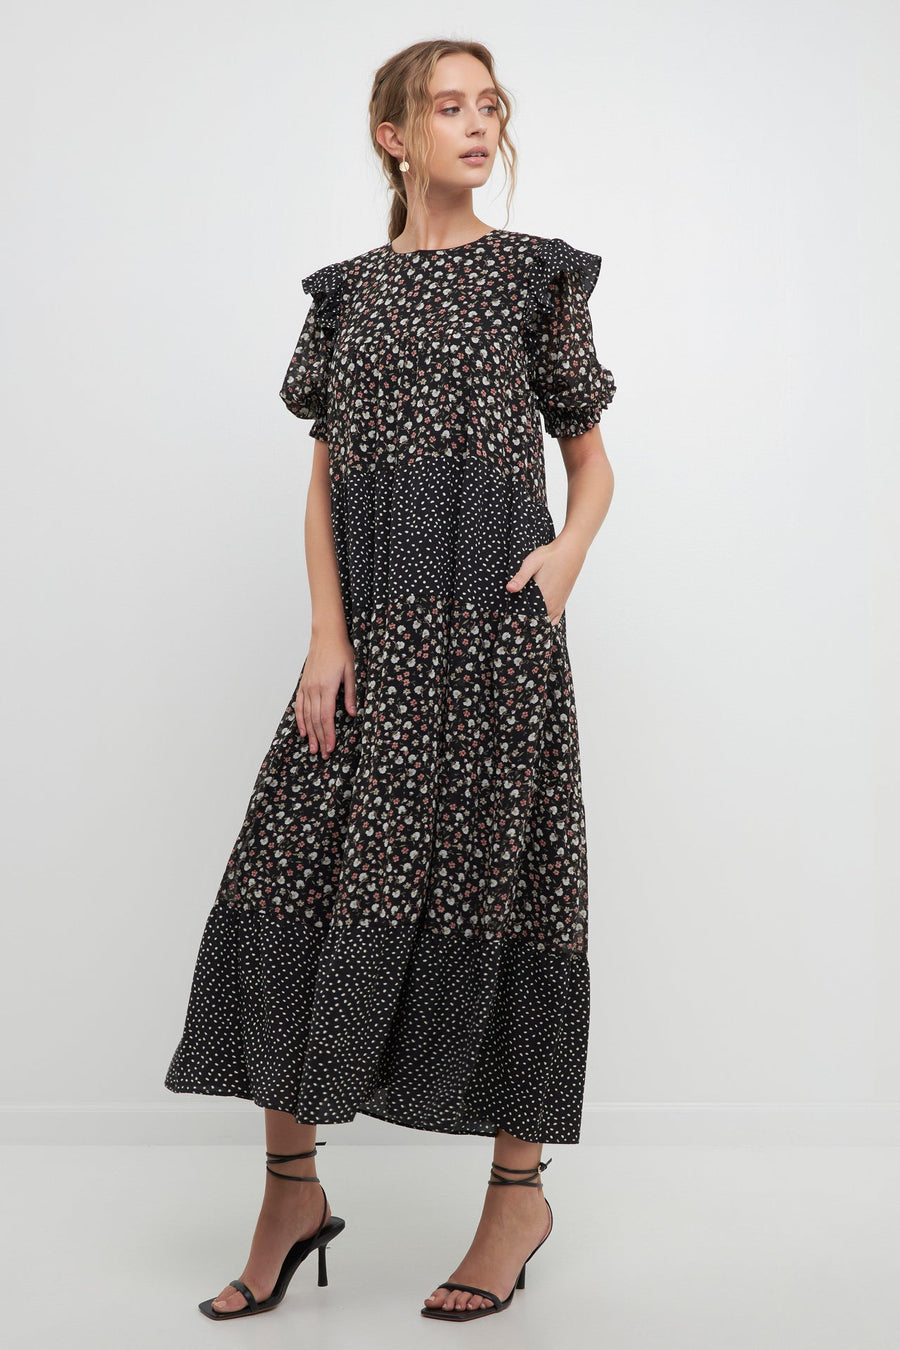 FREE THE ROSES-Floral & Dot Print Maxi Dress-DRESSES available at Objectrare